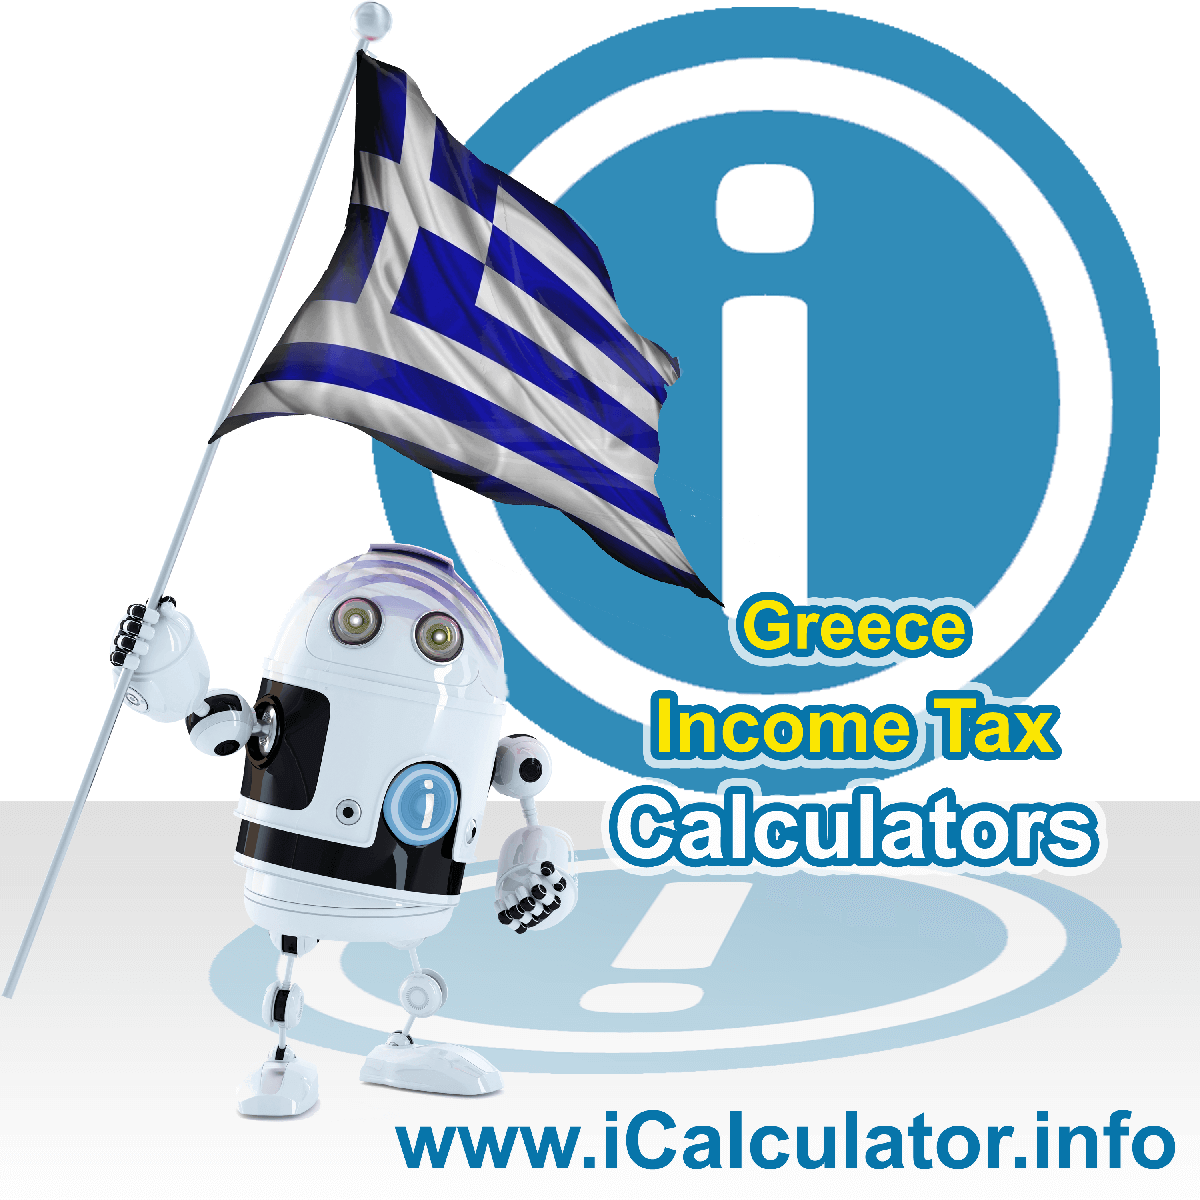 Greece Income Tax Calculator. This image shows a new employer in Greece calculating the annual payroll costs based on multiple payroll payments in one year in Greece using the Greece income tax calculator to understand their payroll costs in Greece in 2023